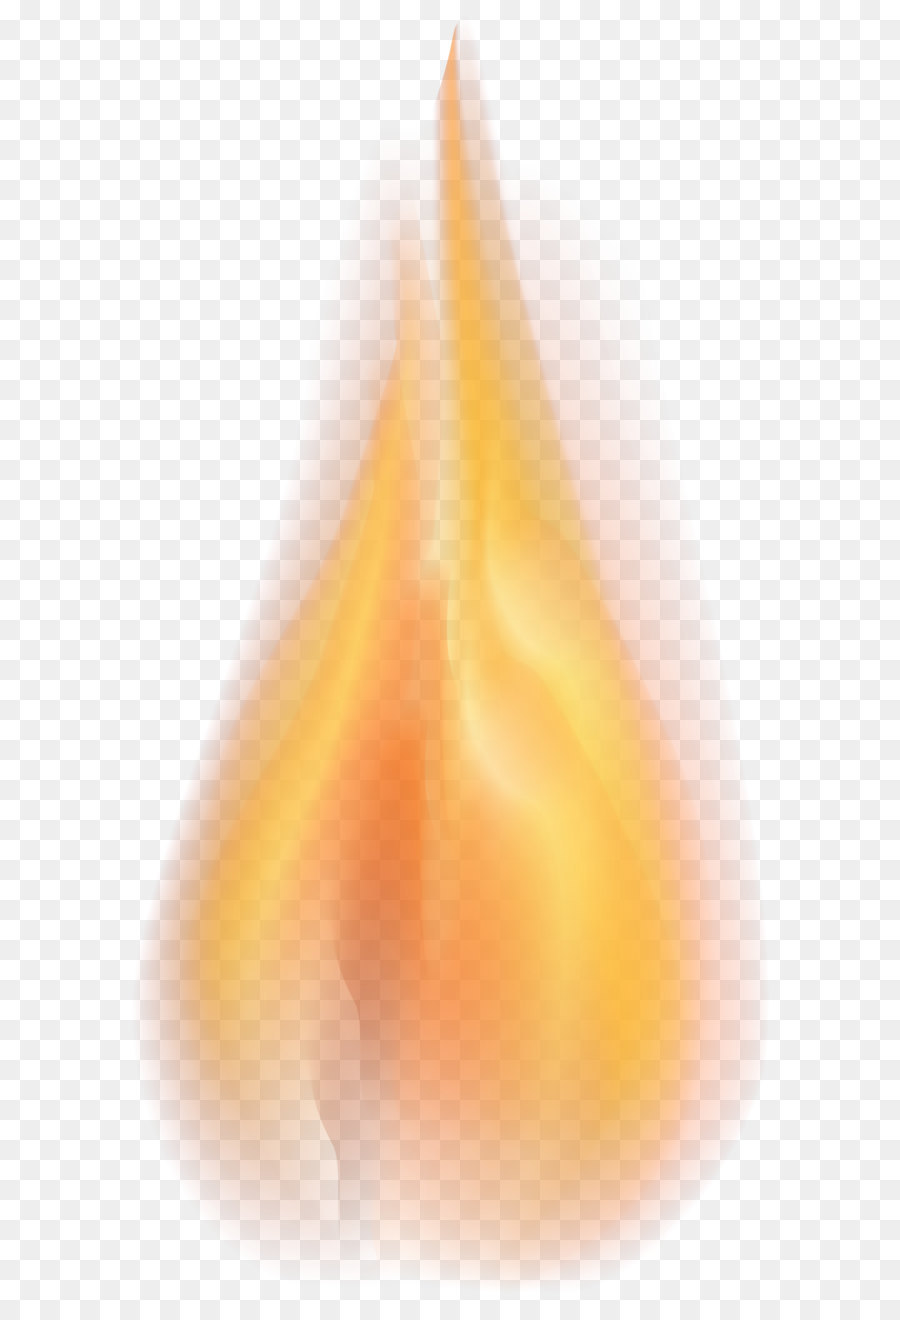 Flame Triangle Digital data Tag - Flame PNG Transparent Clip Art Image png download - 3979*8000 - Free Transparent Flame png Download.